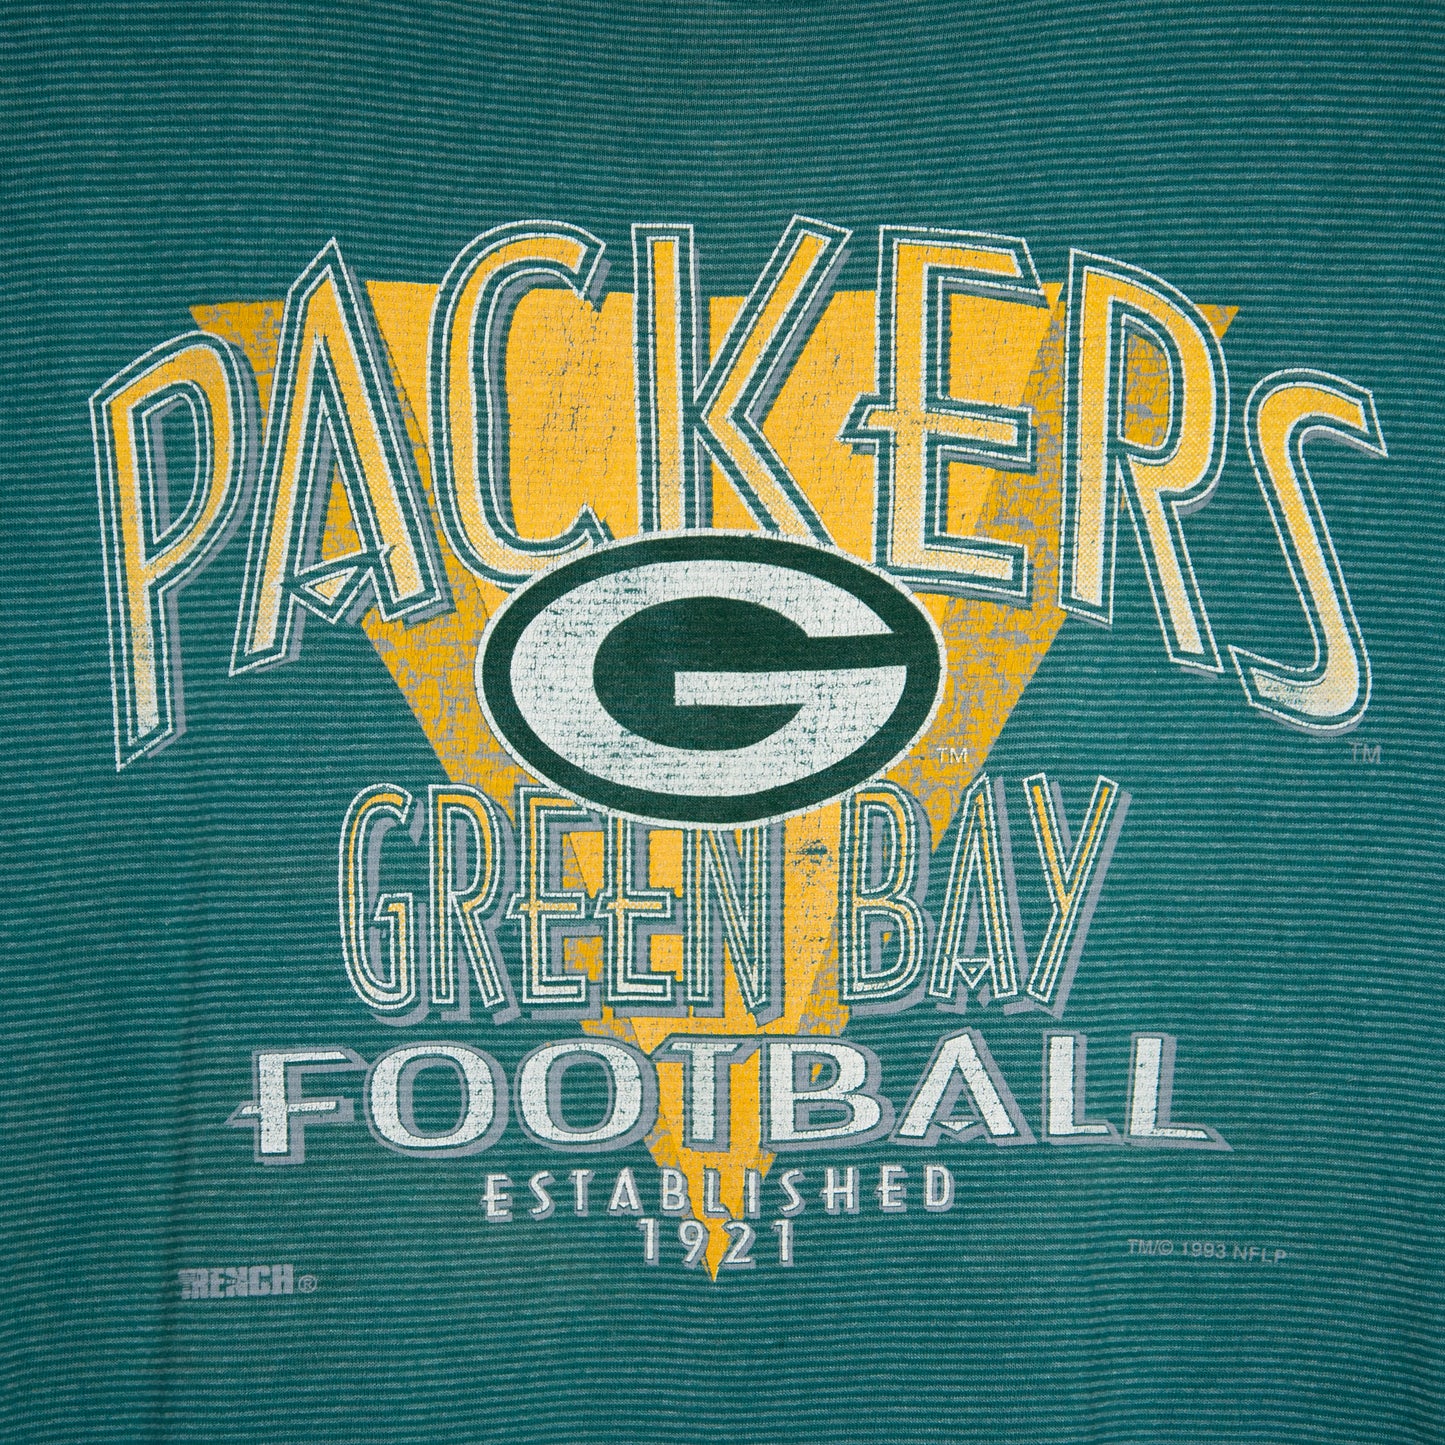 1993 Green Bay Packers T-Shirt Large